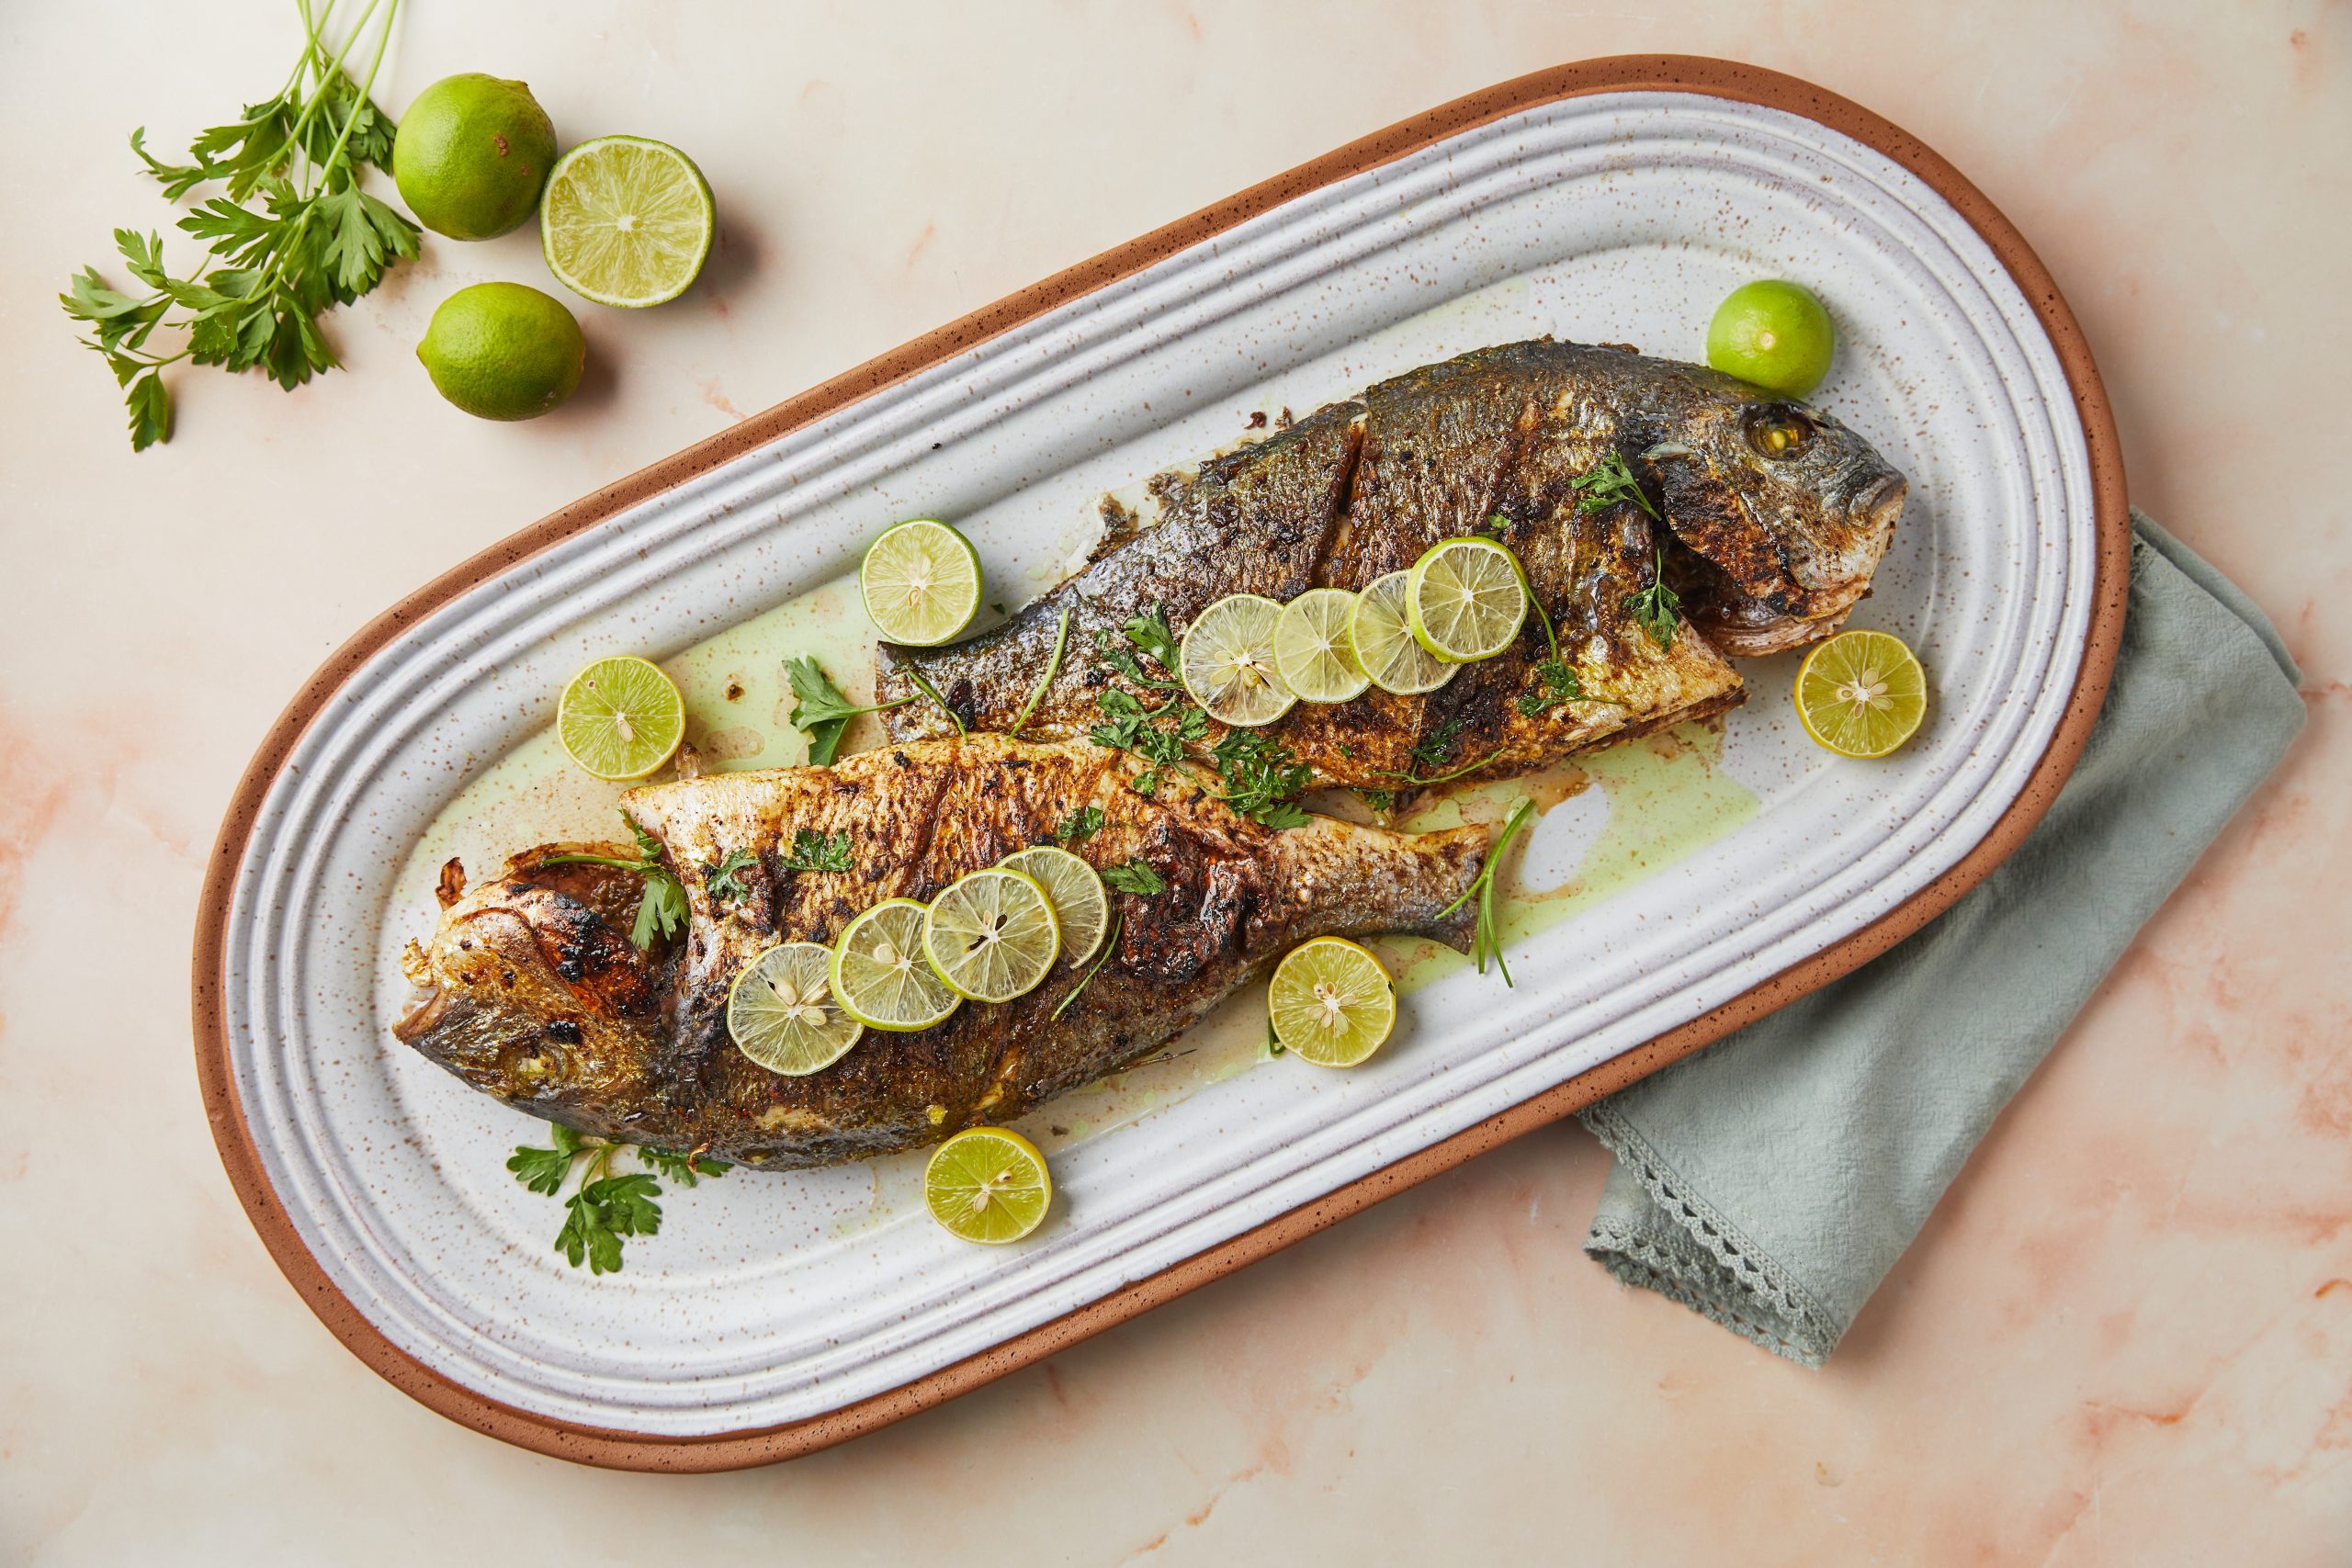 Oven Baked Fish With Machboos Rice